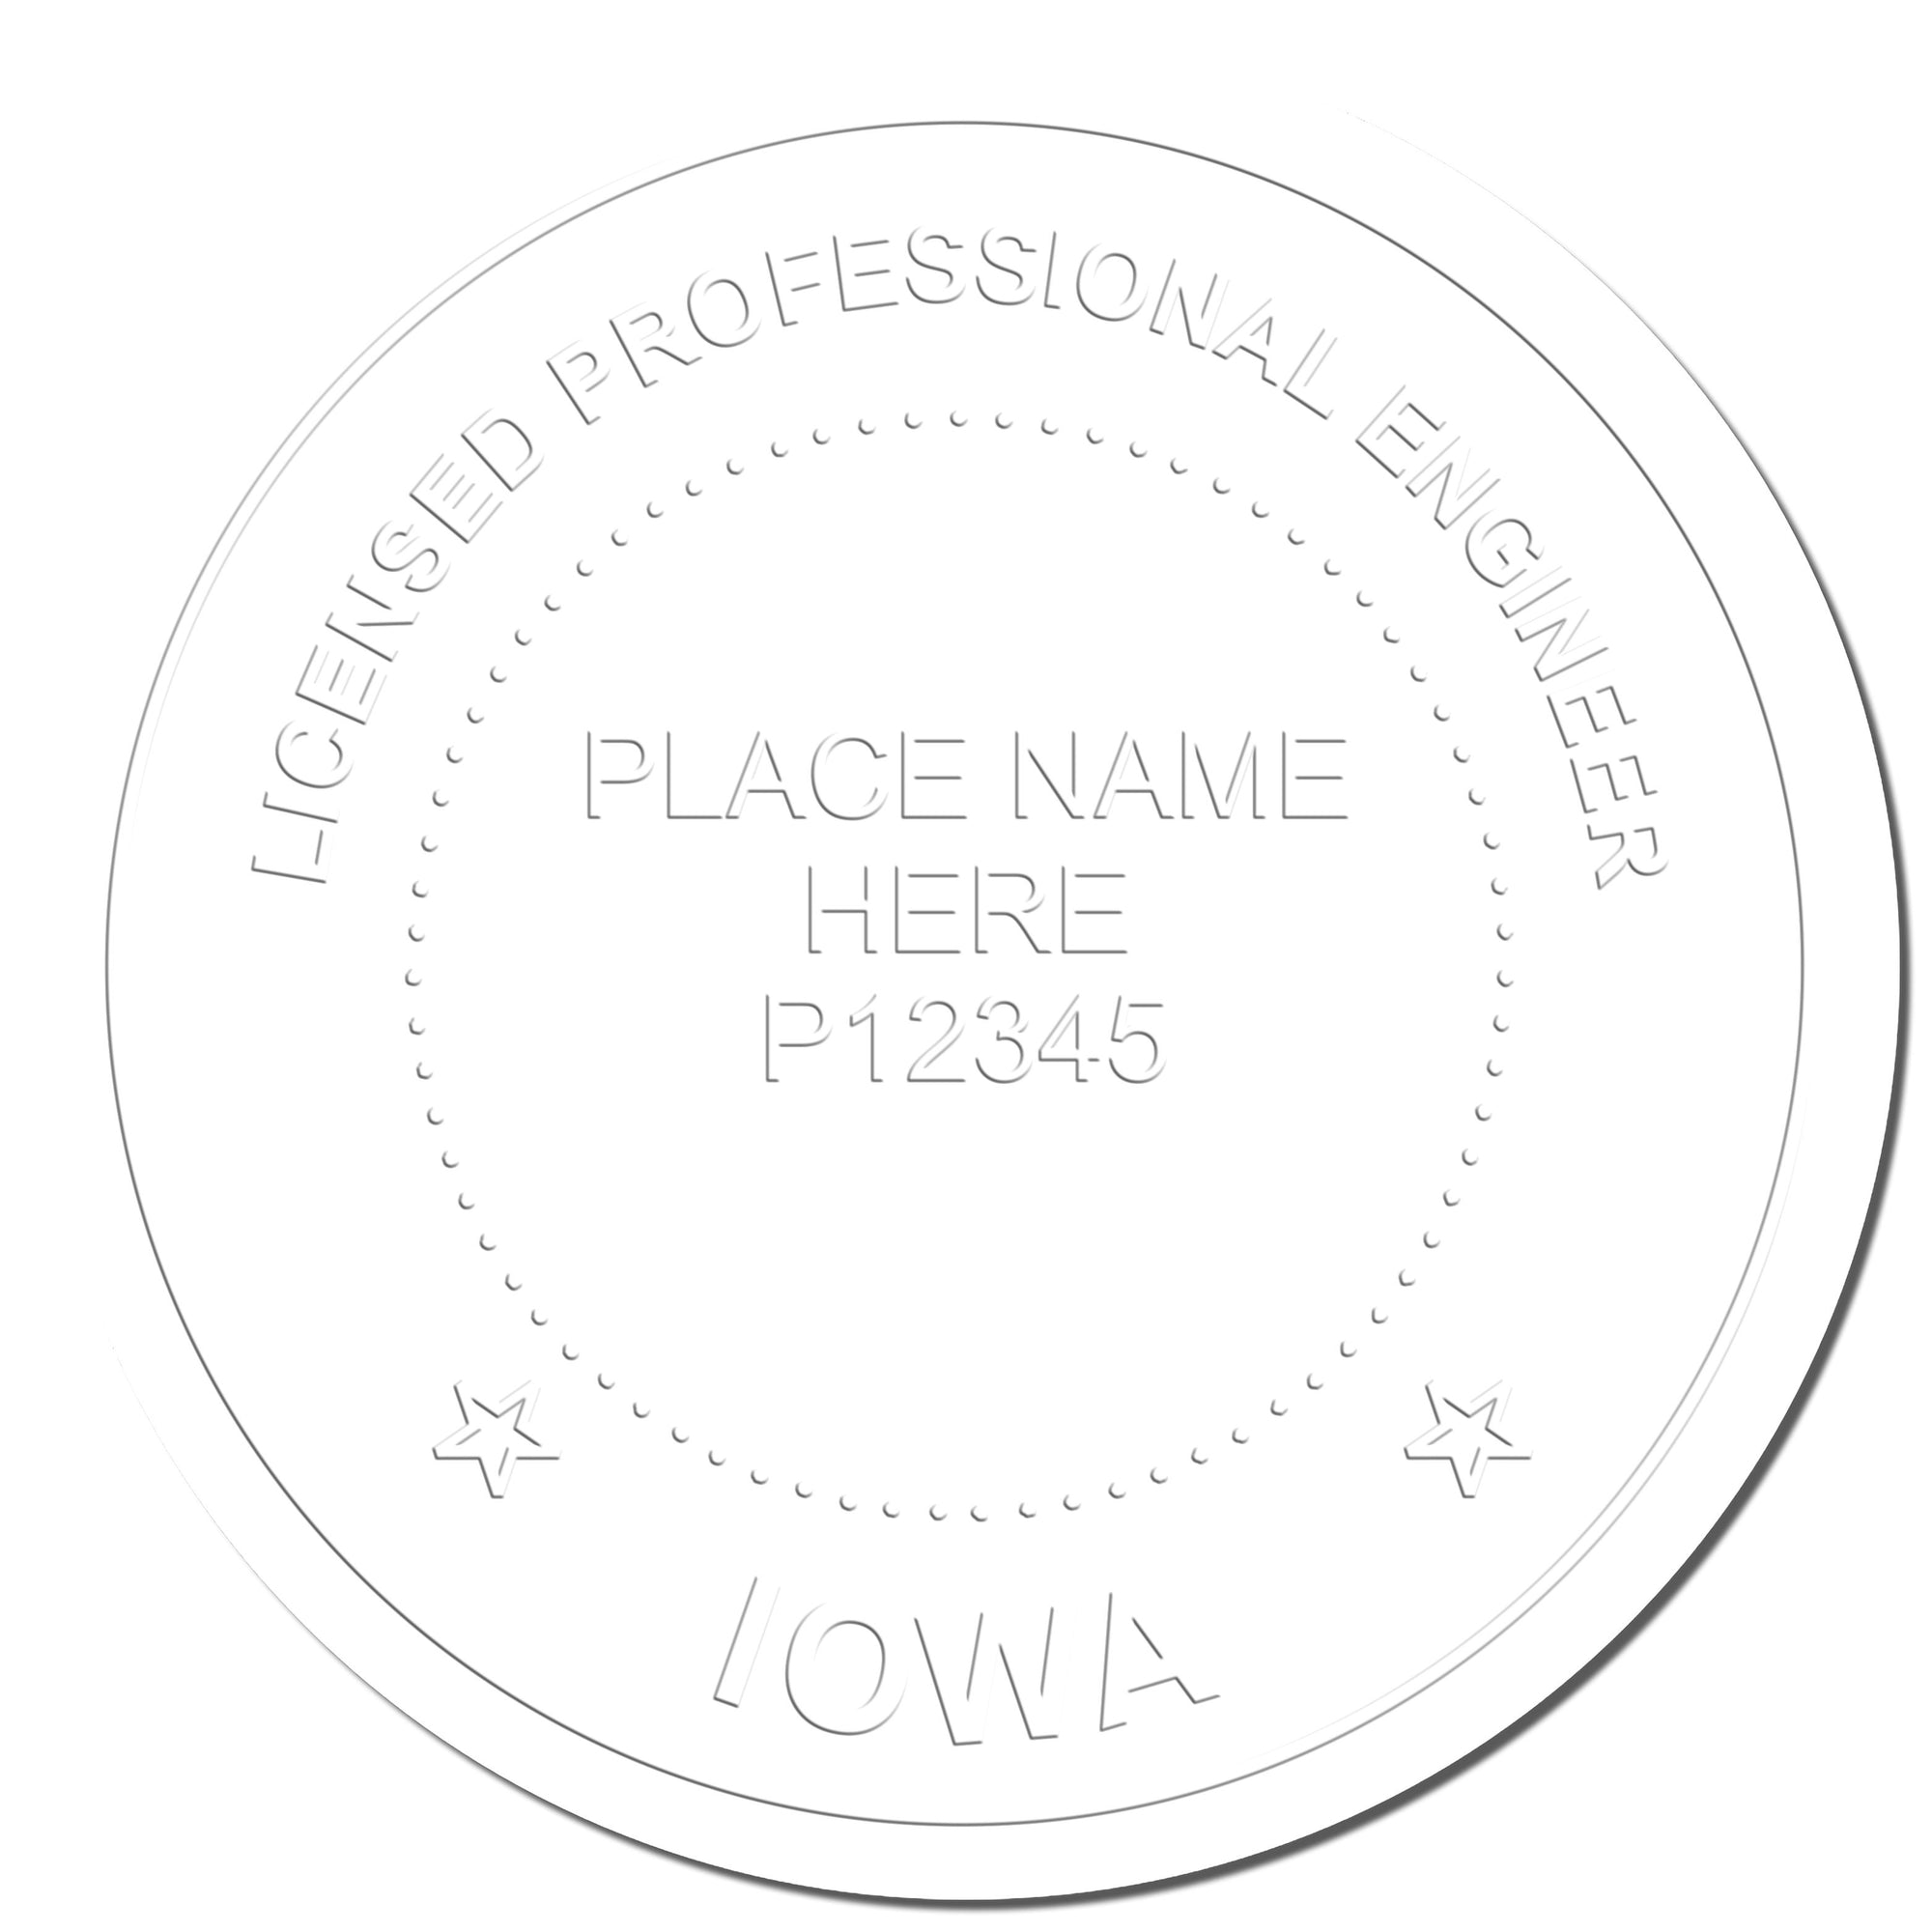 The main image for the Iowa Engineer Desk Seal depicting a sample of the imprint and electronic files